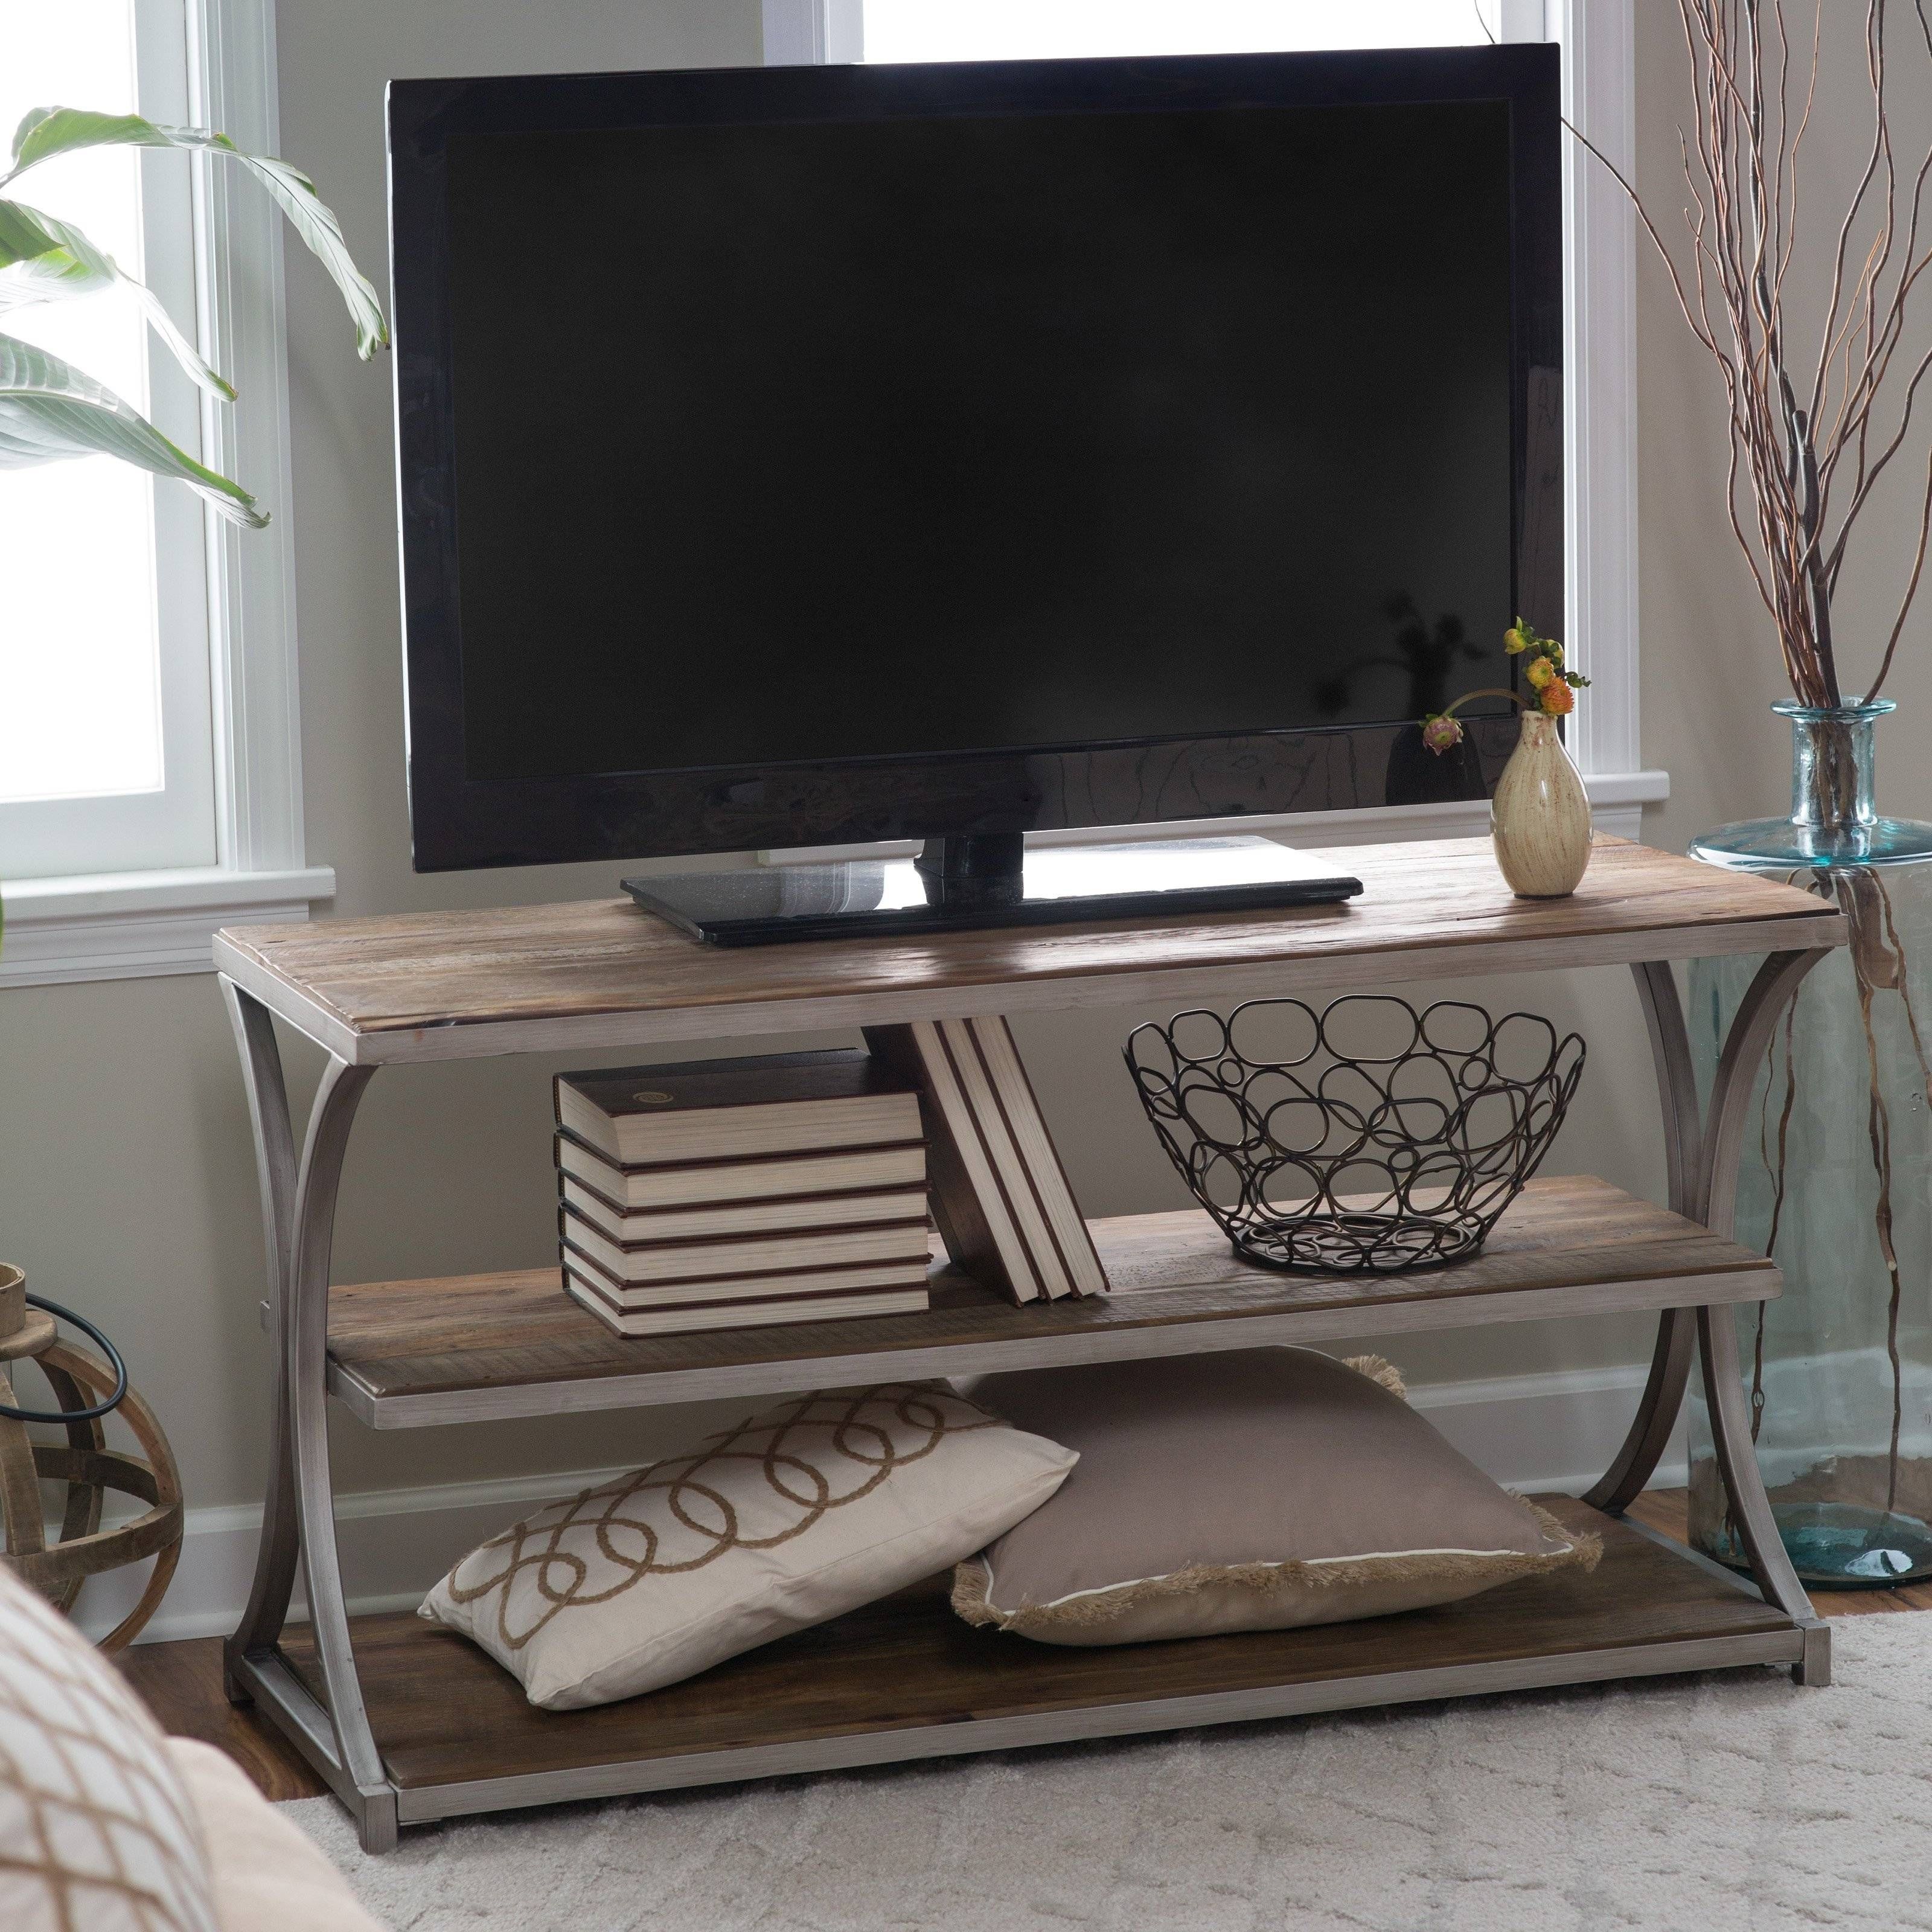 Belham Living Edison Reclaimed Wood Tv Stand | Hayneedle Throughout Wood And Metal Tv Stands (View 7 of 15)